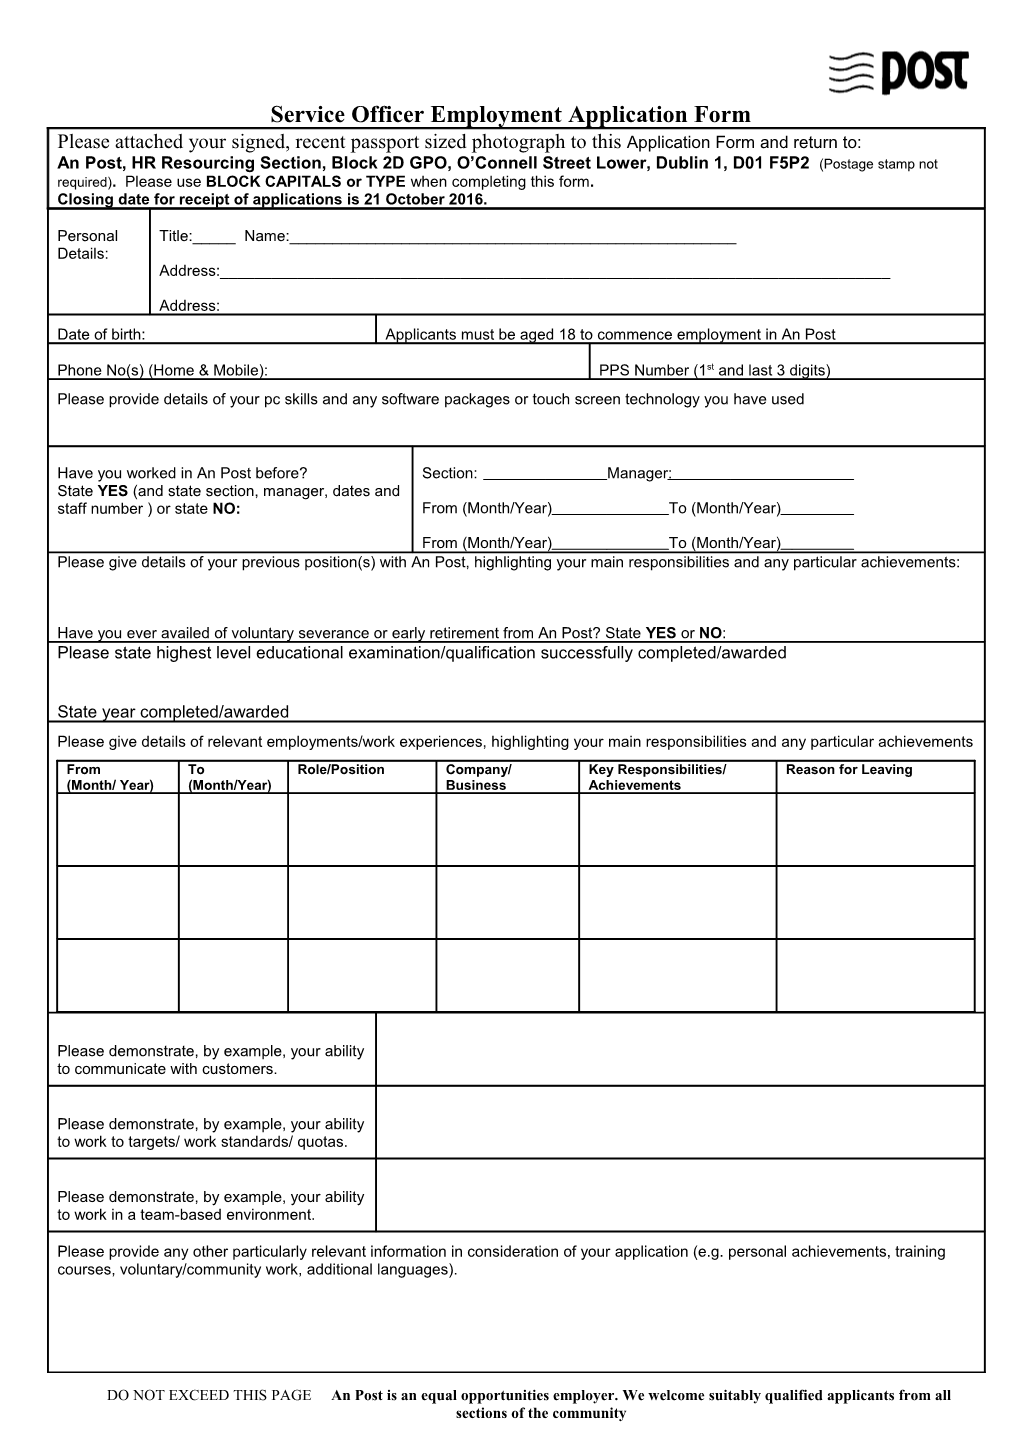 Service Officeremployment Application Form